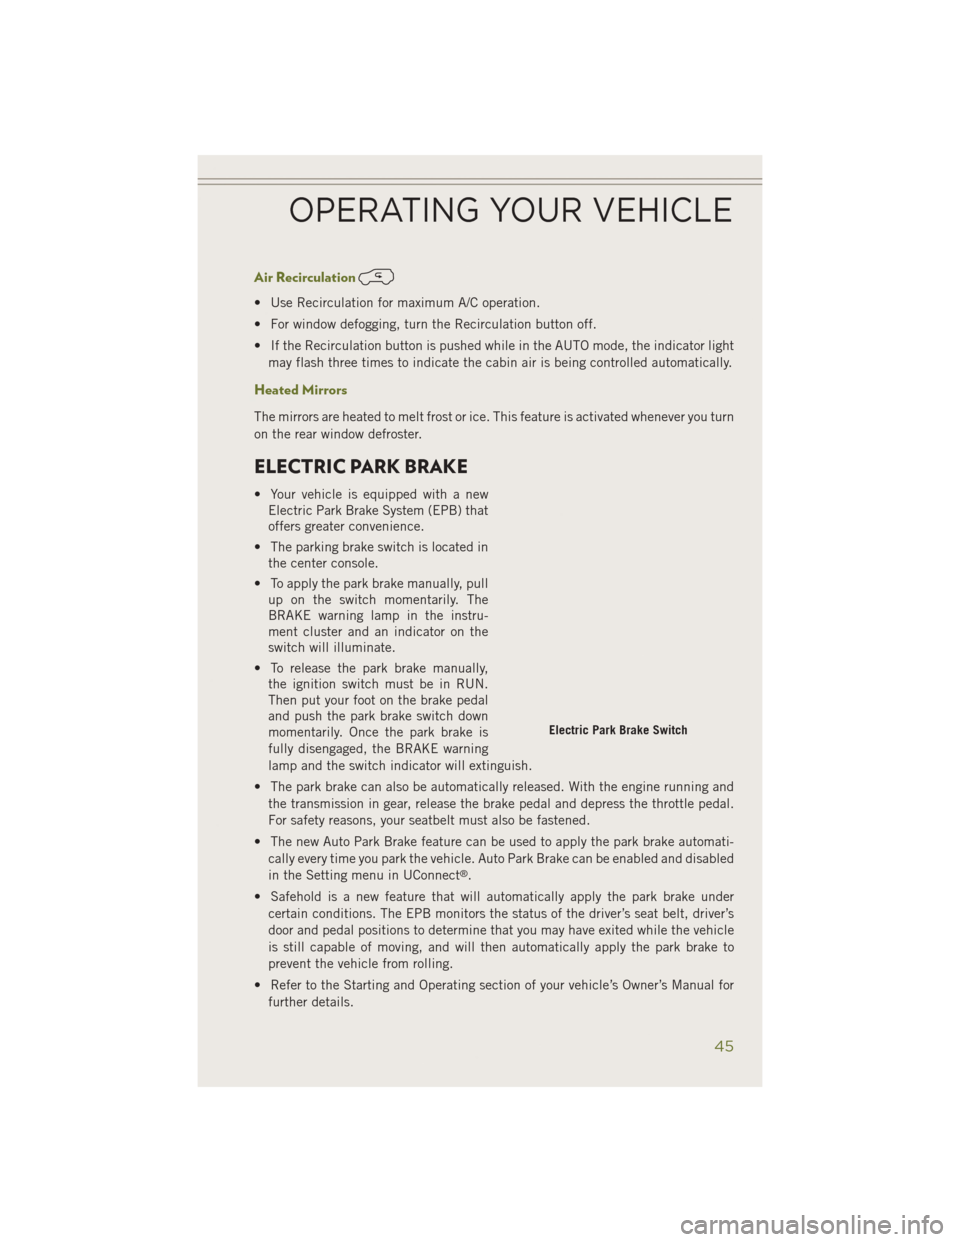 JEEP CHEROKEE 2014 KL / 5.G Owners Manual Air Recirculation
• Use Recirculation for maximum A/C operation.
• For window defogging, turn the Recirculation button off.
• If the Recirculation button is pushed while in the AUTO mode, the in